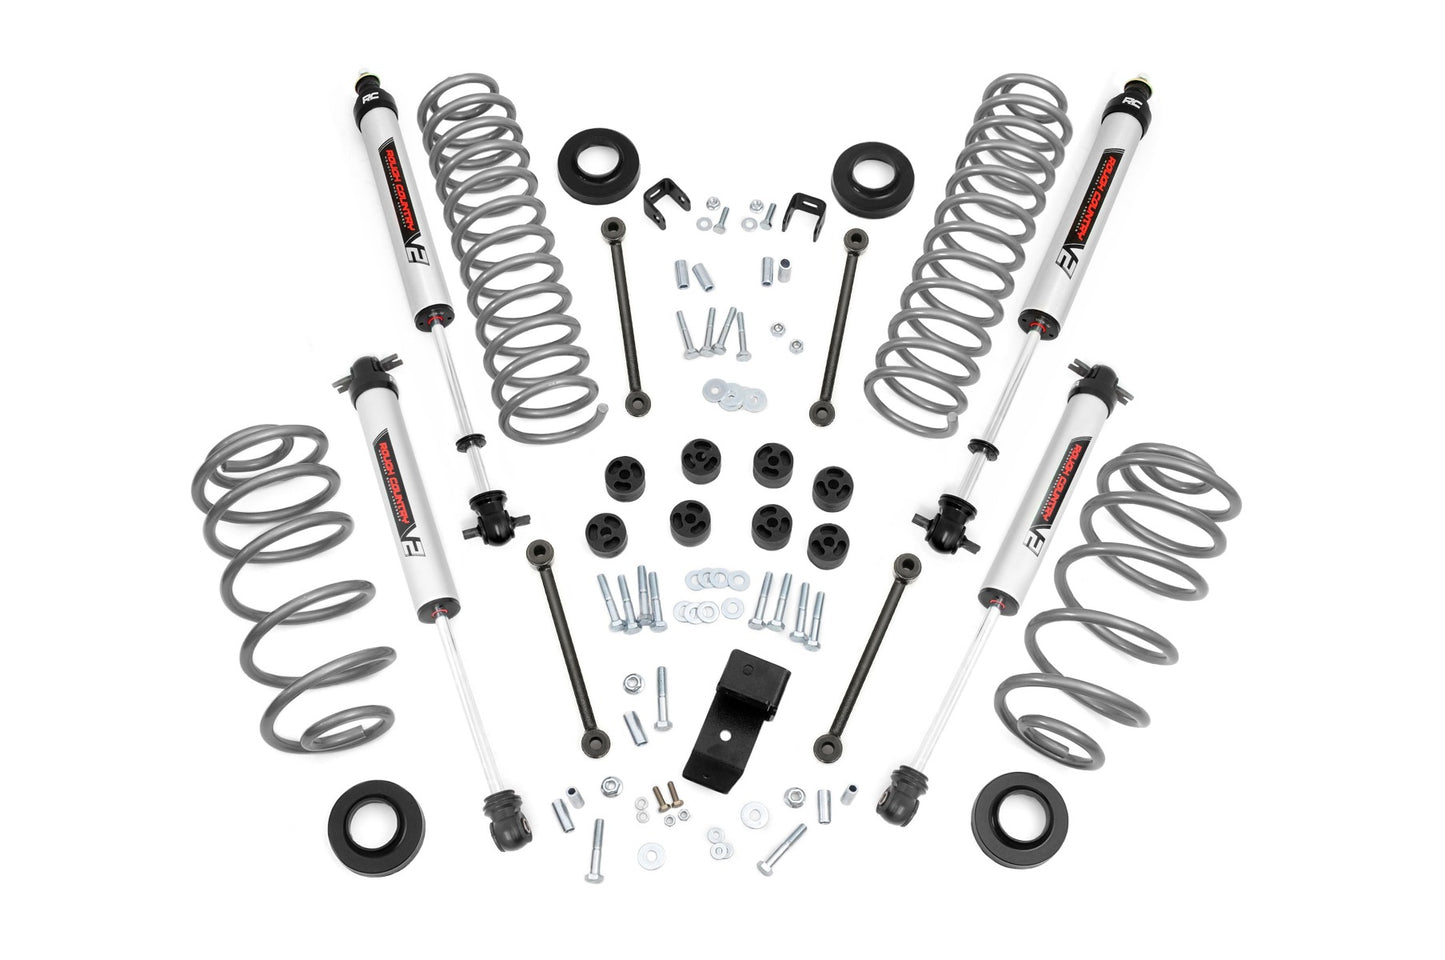 Rough Country (64170) 3.25 Inch Lift Kit | 4 Cyl | V2 | Jeep Wrangler TJ 4WD (1997-2002)